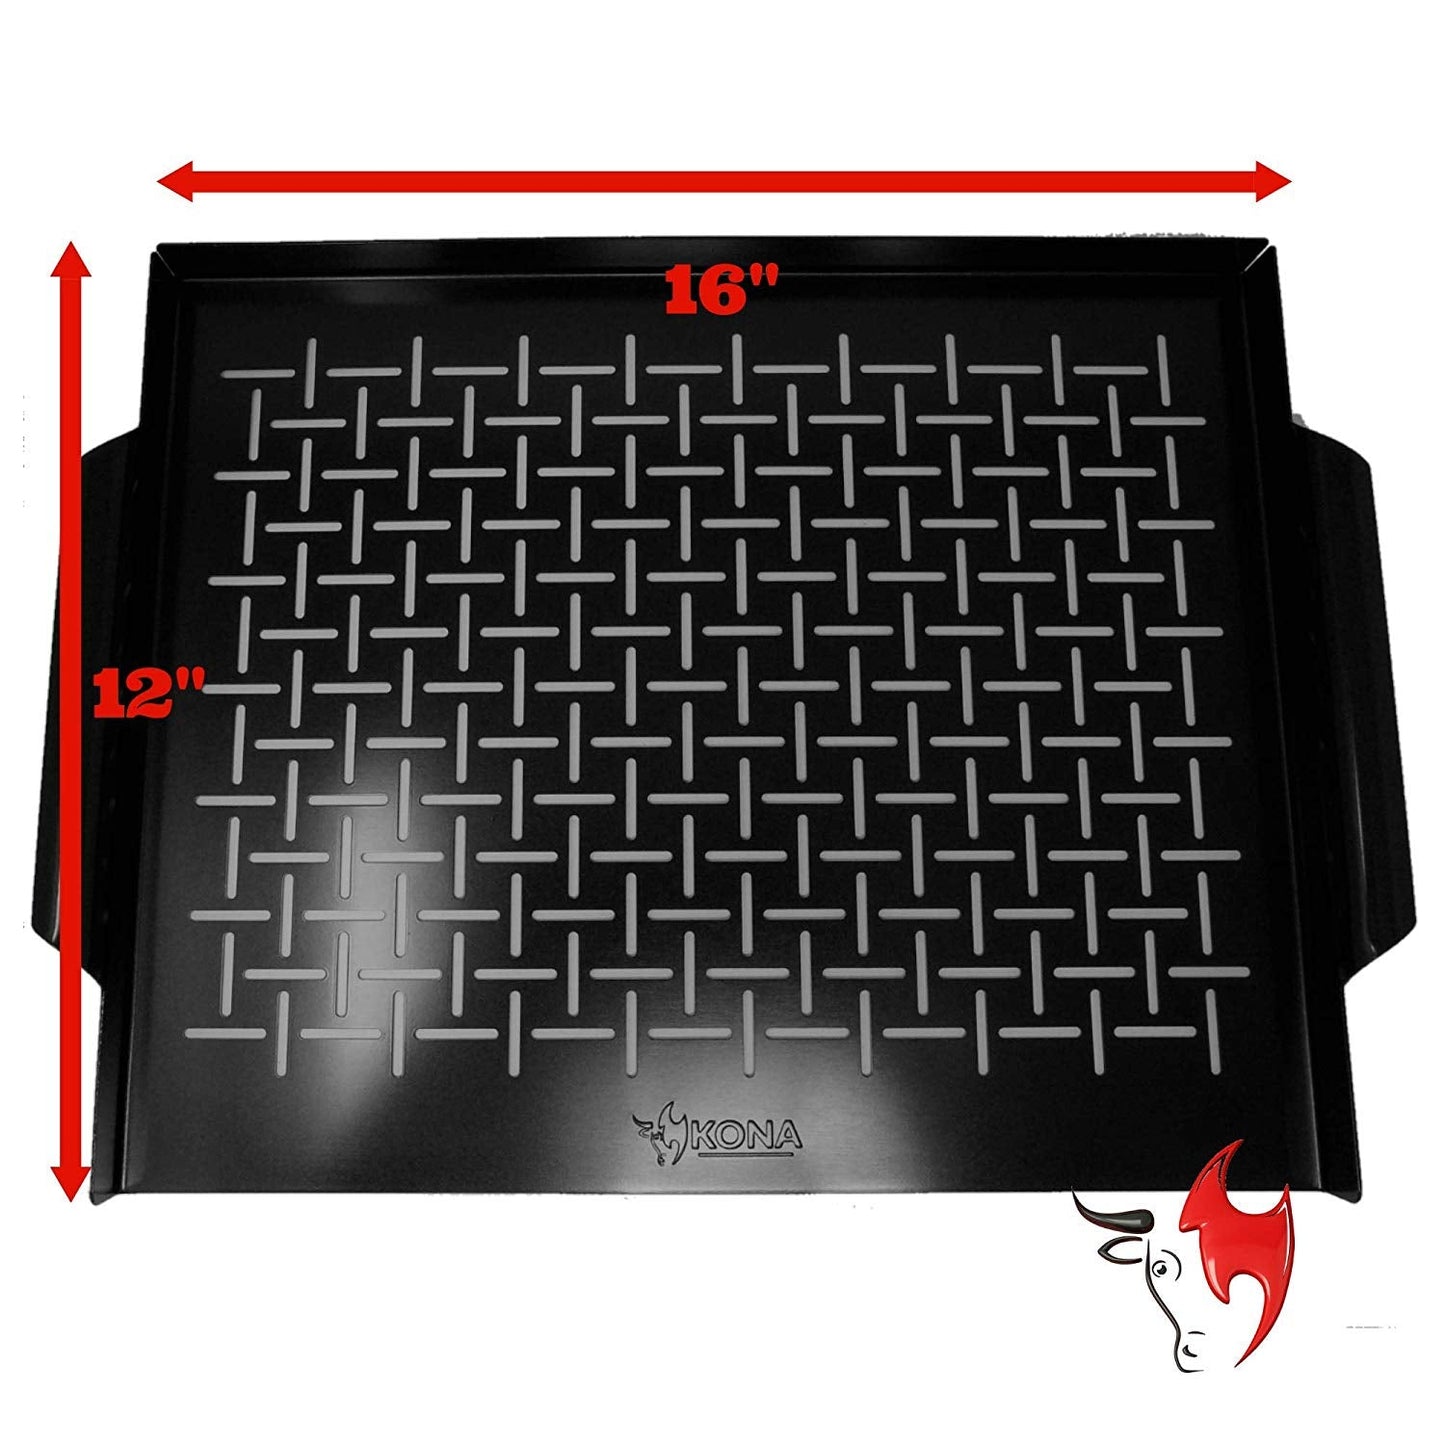 Kona Best Grill Tray with Custom Fit Best Grill Mat- The Ultimate Non-Stick Grilling Tray Combo! - The Tool Store